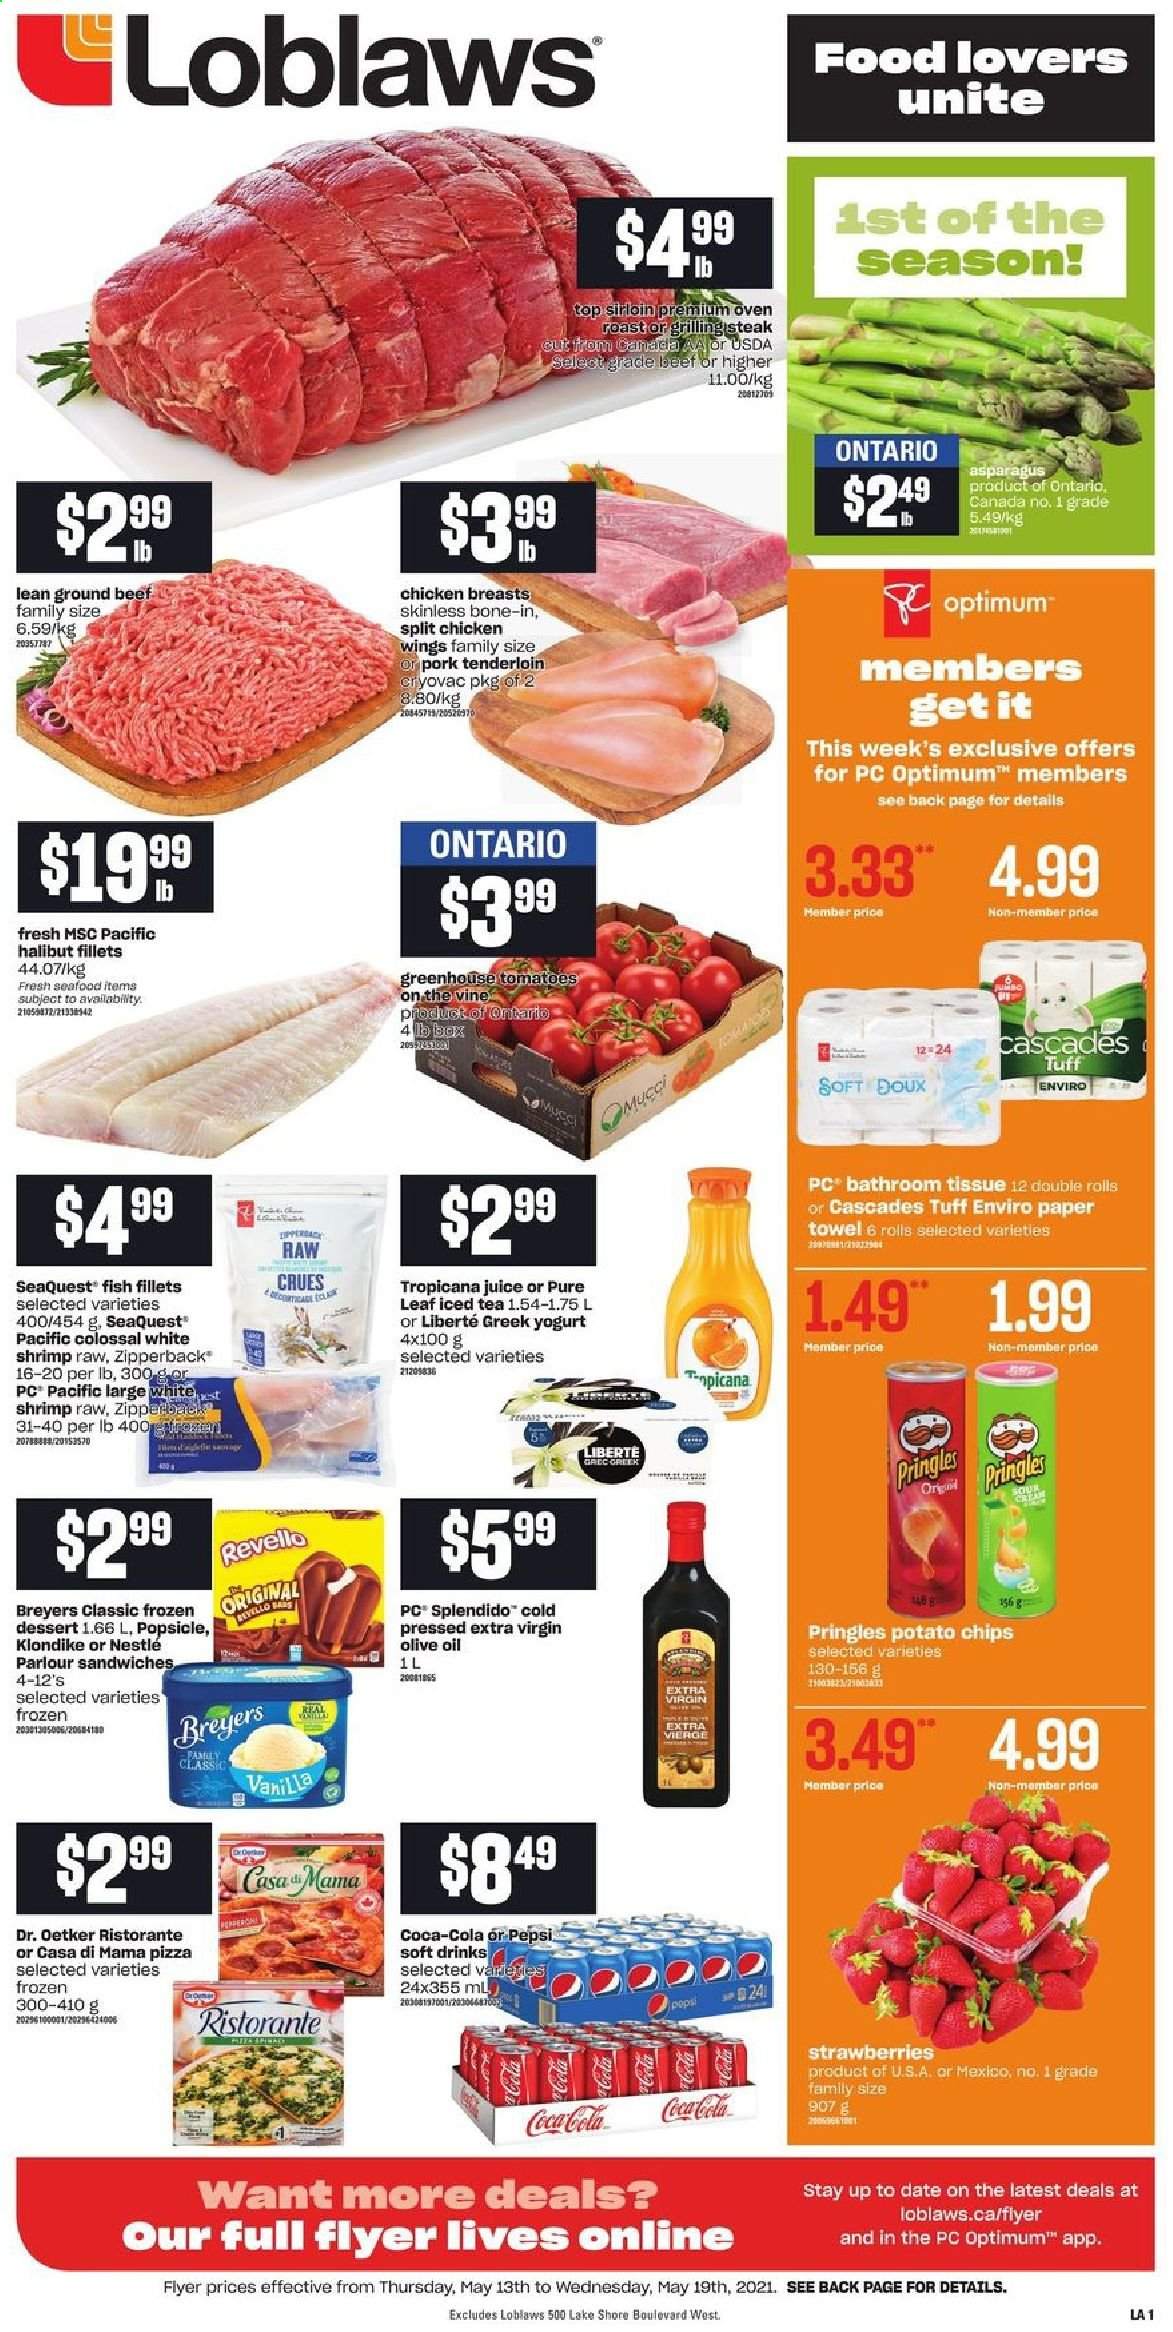 thumbnail - Loblaws Flyer - May 13, 2021 - May 19, 2021 - Sales products - asparagus, strawberries, fish fillets, halibut, seafood, fish, shrimps, pizza, sandwich, Dr. Oetker, greek yoghurt, yoghurt, chicken wings, potato chips, Pringles, extra virgin olive oil, olive oil, oil, Coca-Cola, Pepsi, juice, ice tea, soft drink, Pure Leaf, chicken breasts, beef meat, ground beef, pork meat, pork tenderloin, bath tissue, paper towels, Optimum, Nestlé. Page 1.